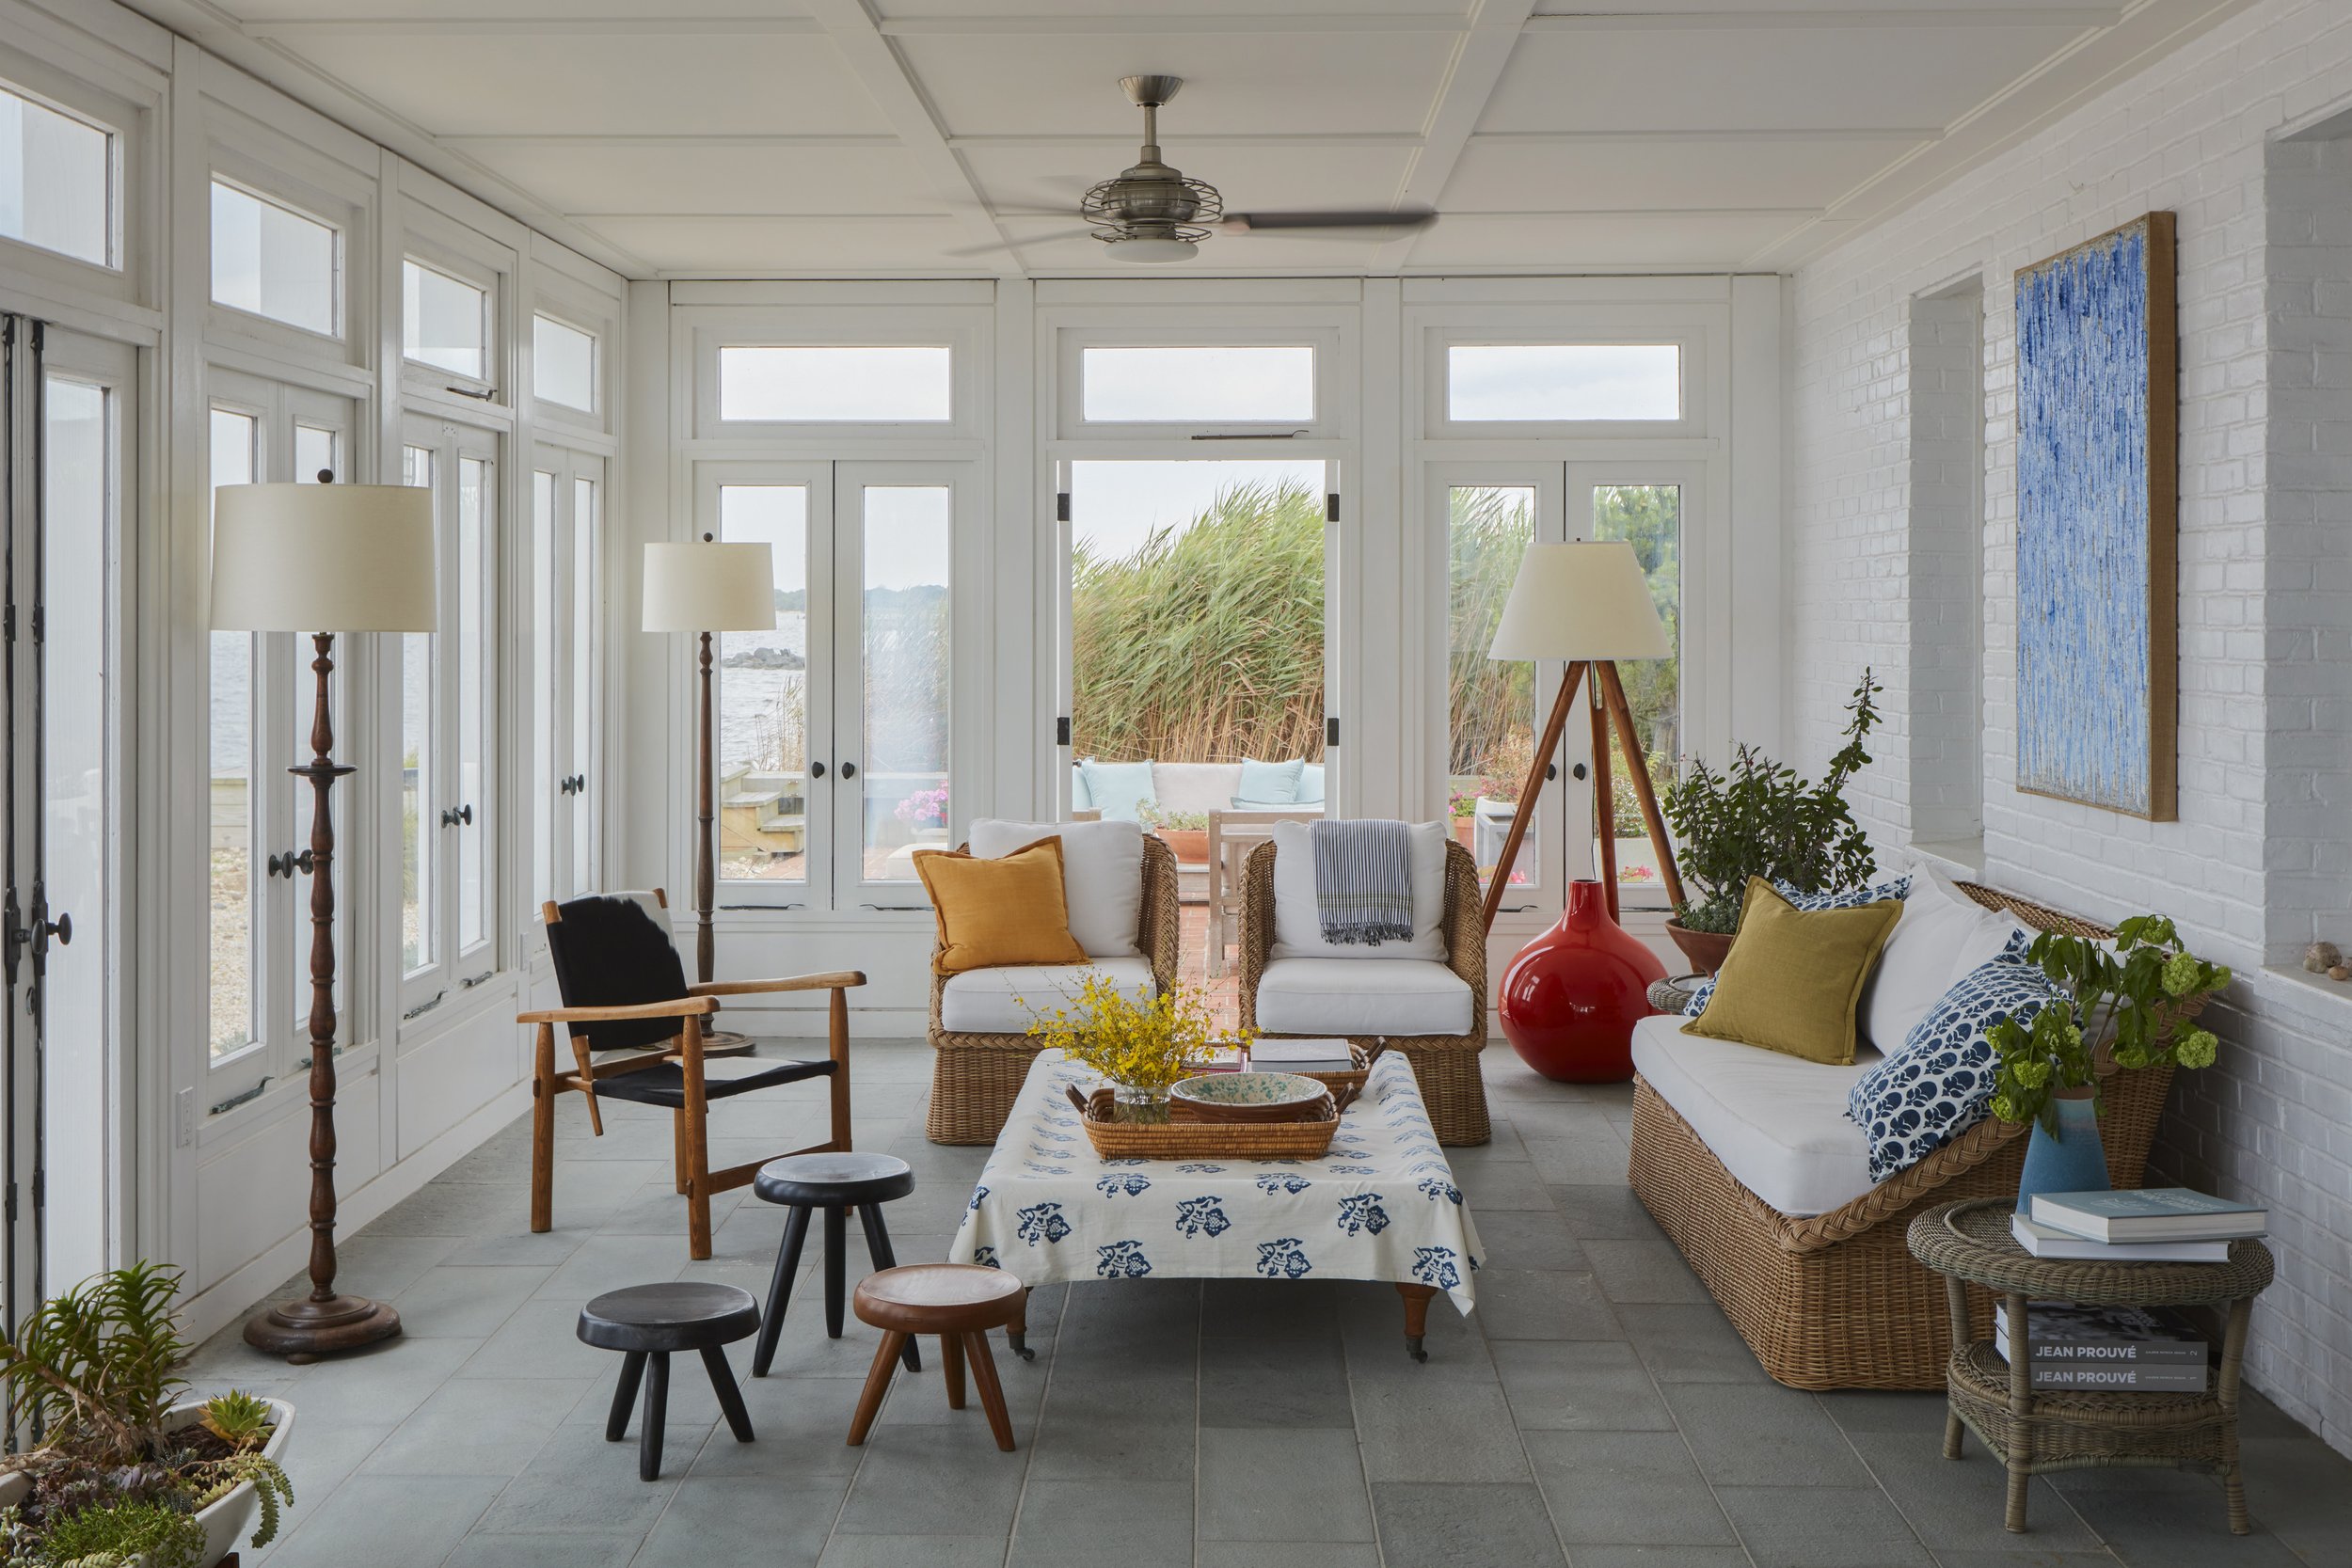  Charlap Hyman &amp; Herrero  Tina Kim Long Island   Featured in September 2022 issue of Maison, Tina Kim’s summer villa in Long Island. Designed by architect Adam Charlap Hyman, this cottage style summer house is masterfully curated with the works&n